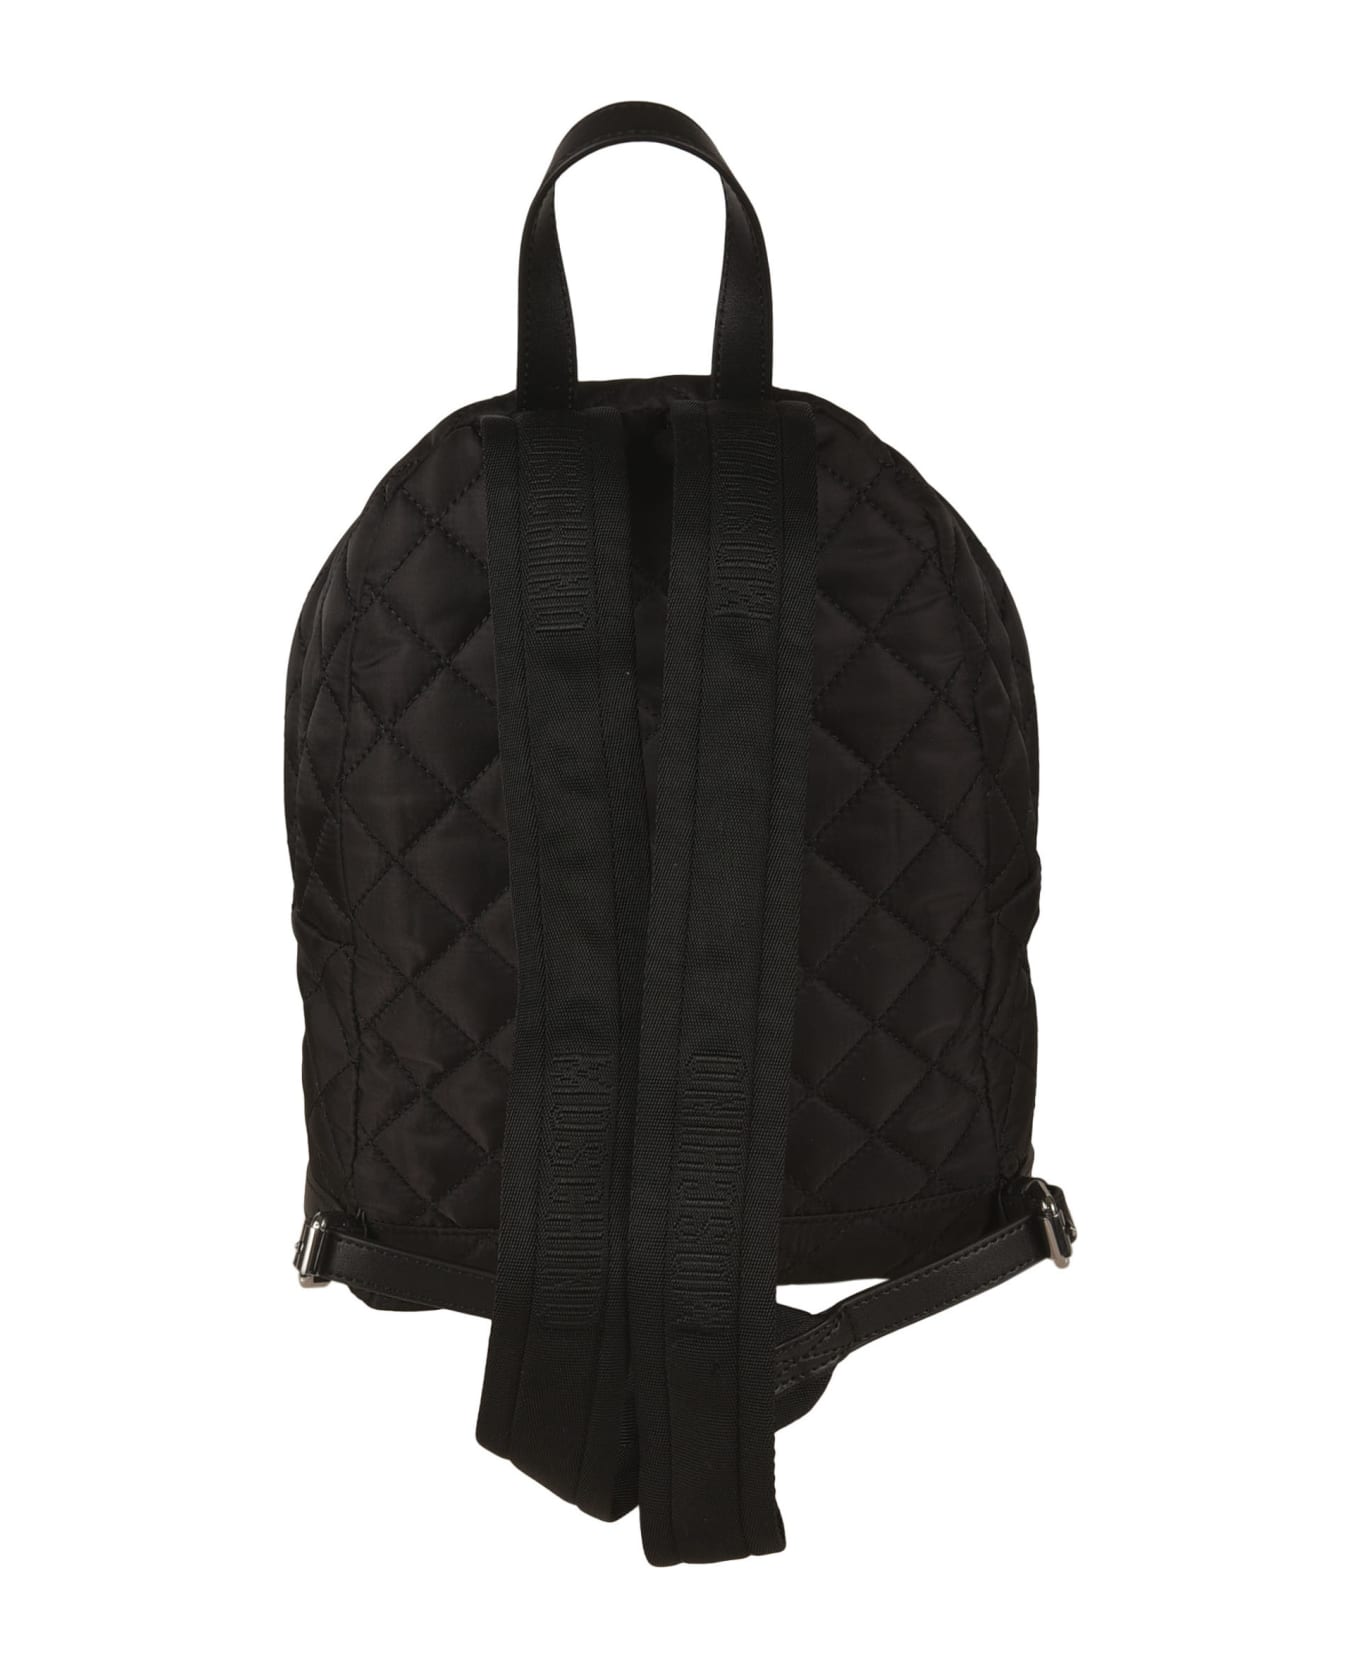 Moschino Quilted Backpack - C